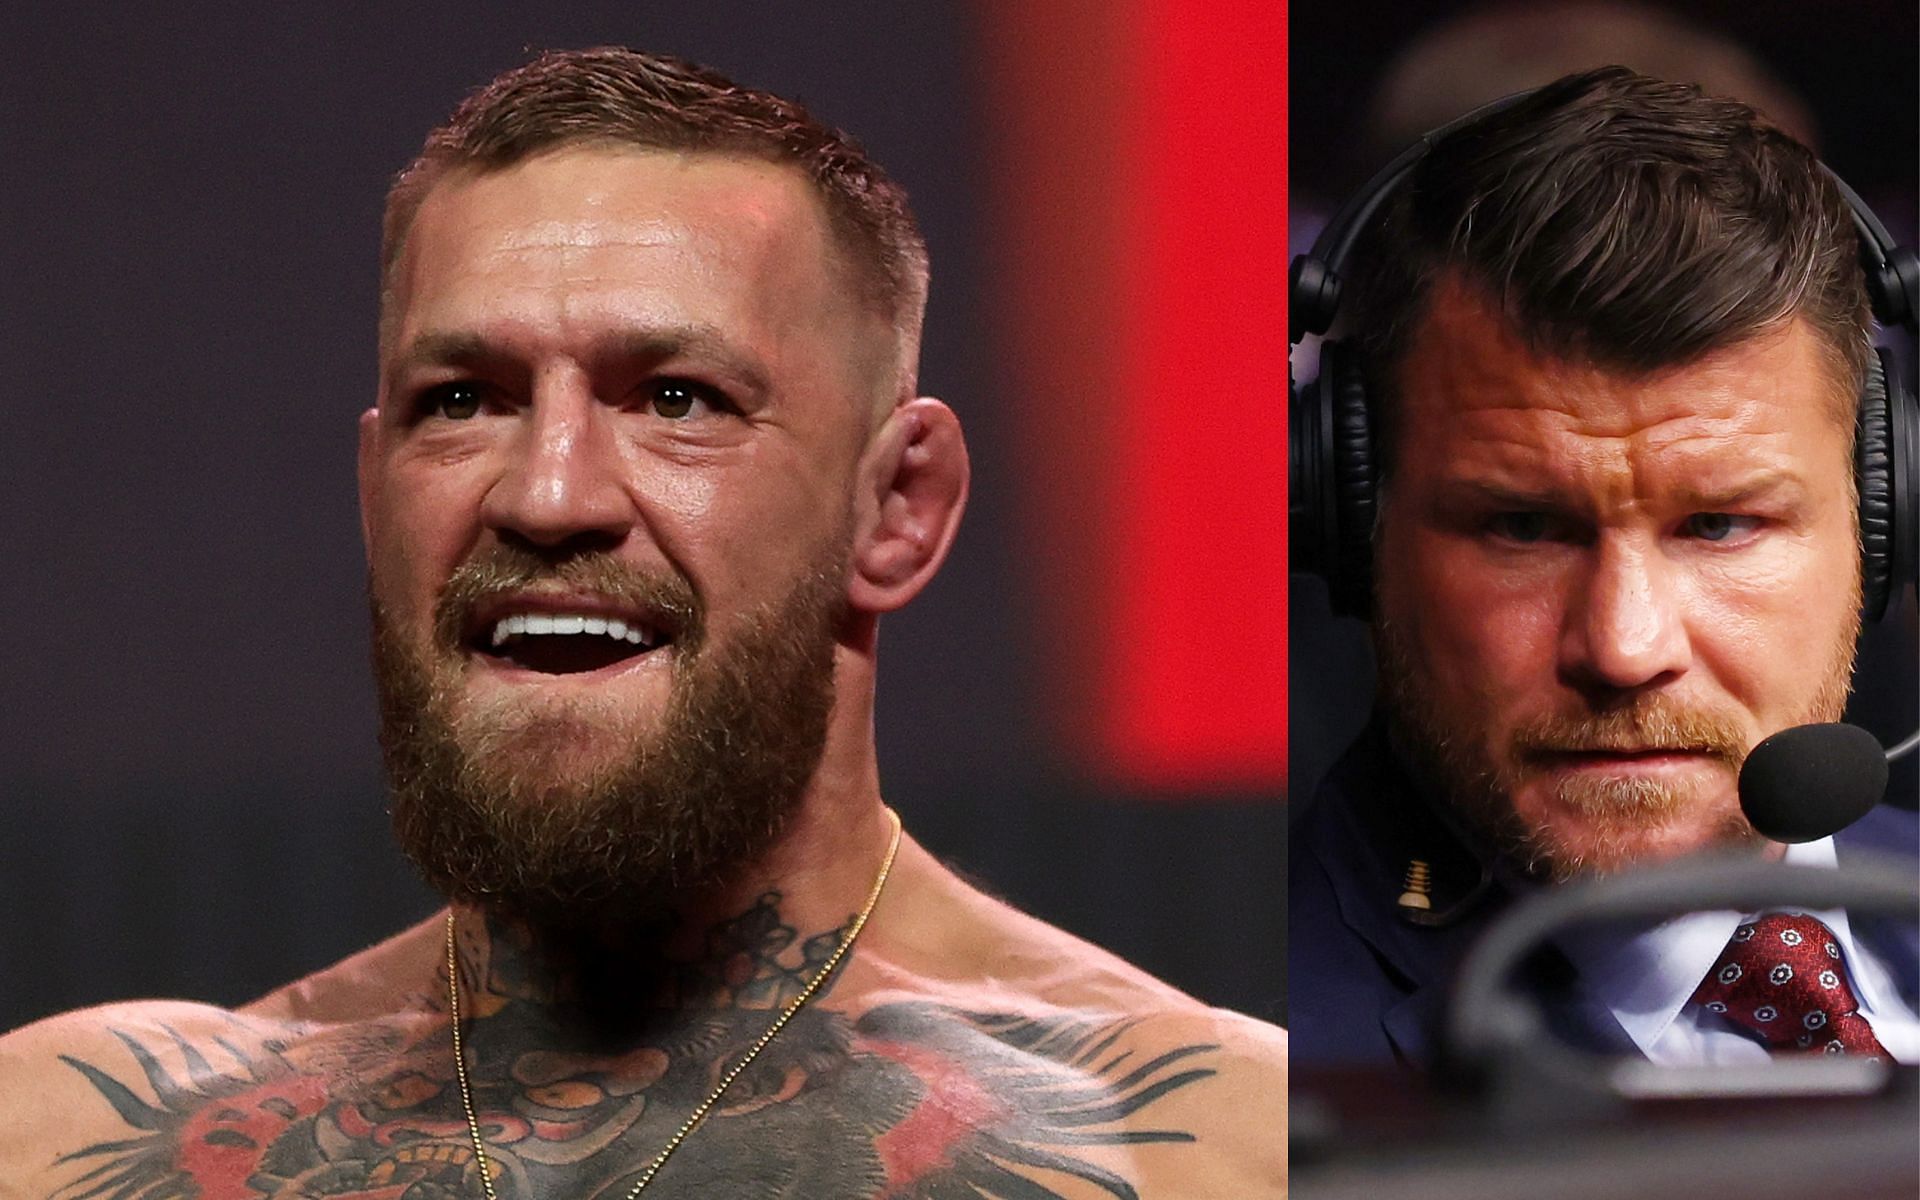 Conor McGregor (left) and Michael Bisping (right). [Images courtesy: Getty Images]